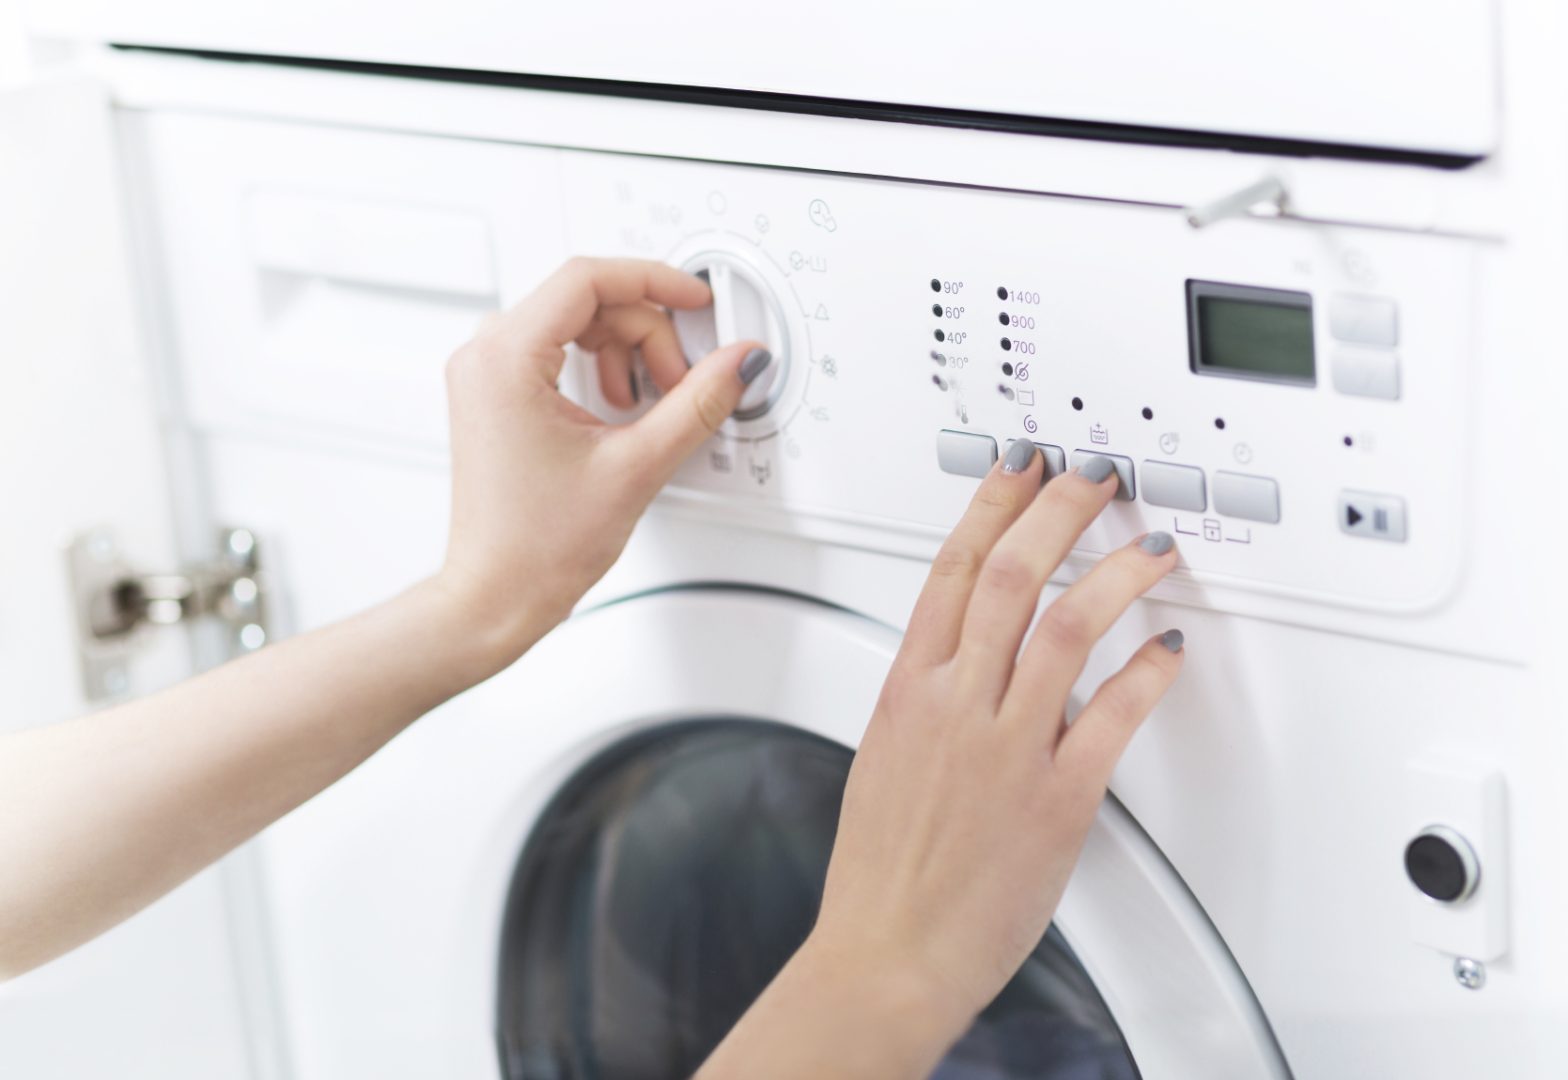 Woman changing washing machine settings after registering appliance